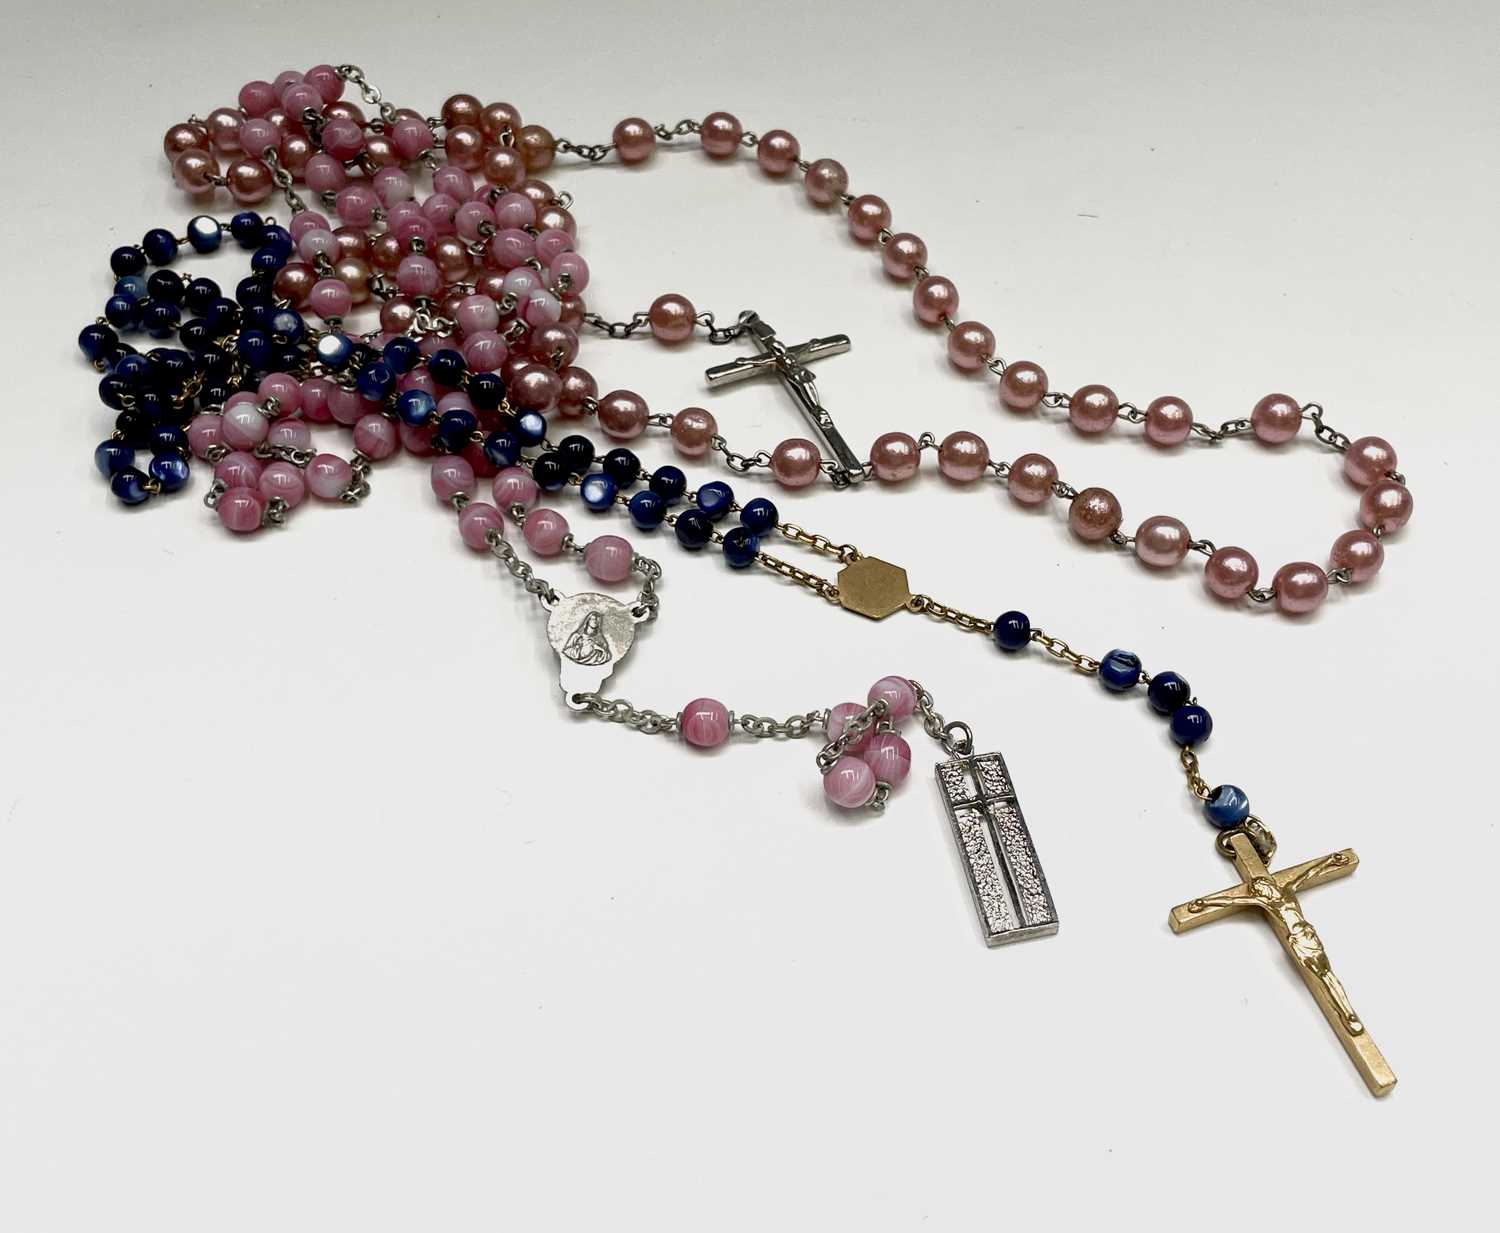 Fifteen rosary bead necklaces, all with unique decorative crosses. - Image 12 of 20